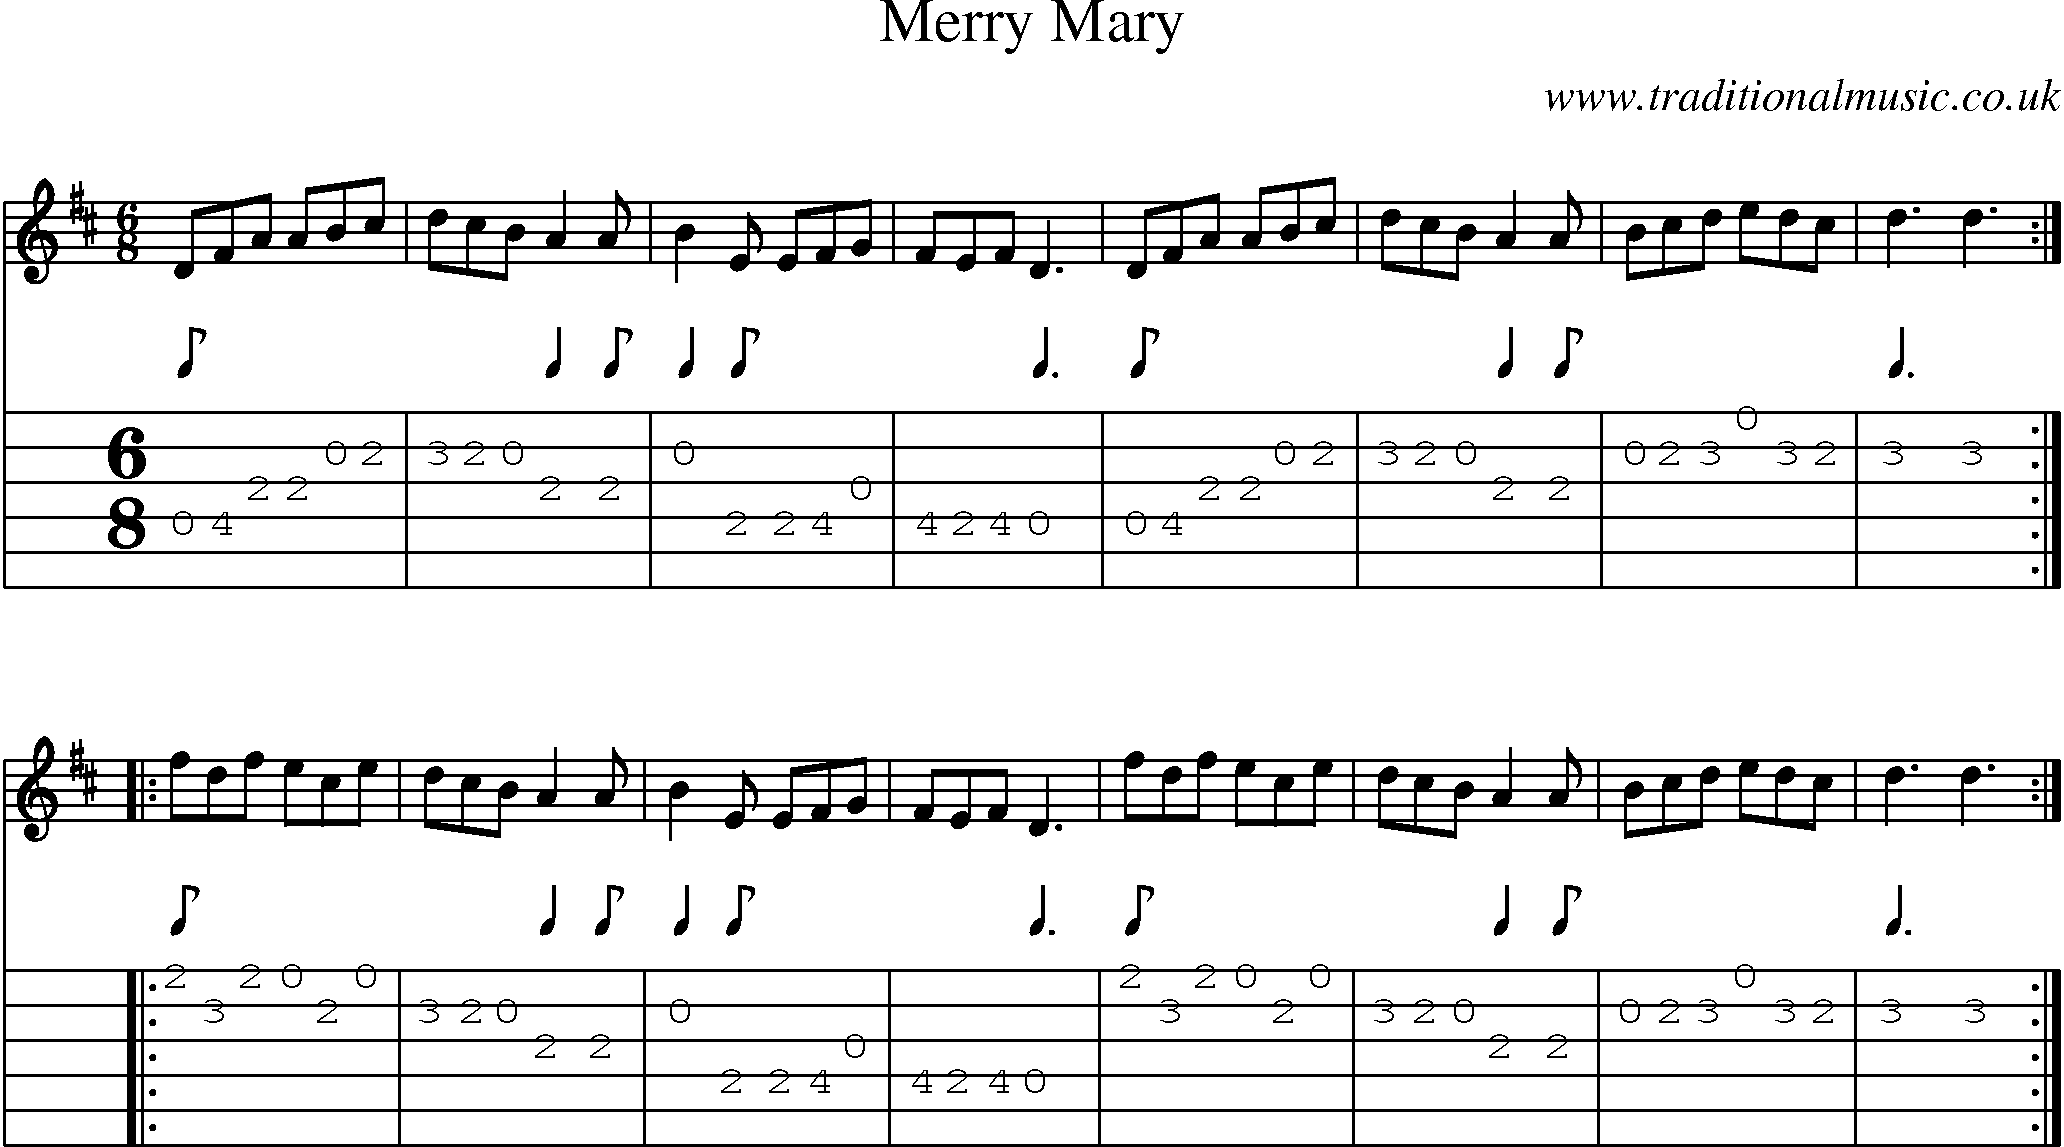 Music Score and Guitar Tabs for Merry Mary